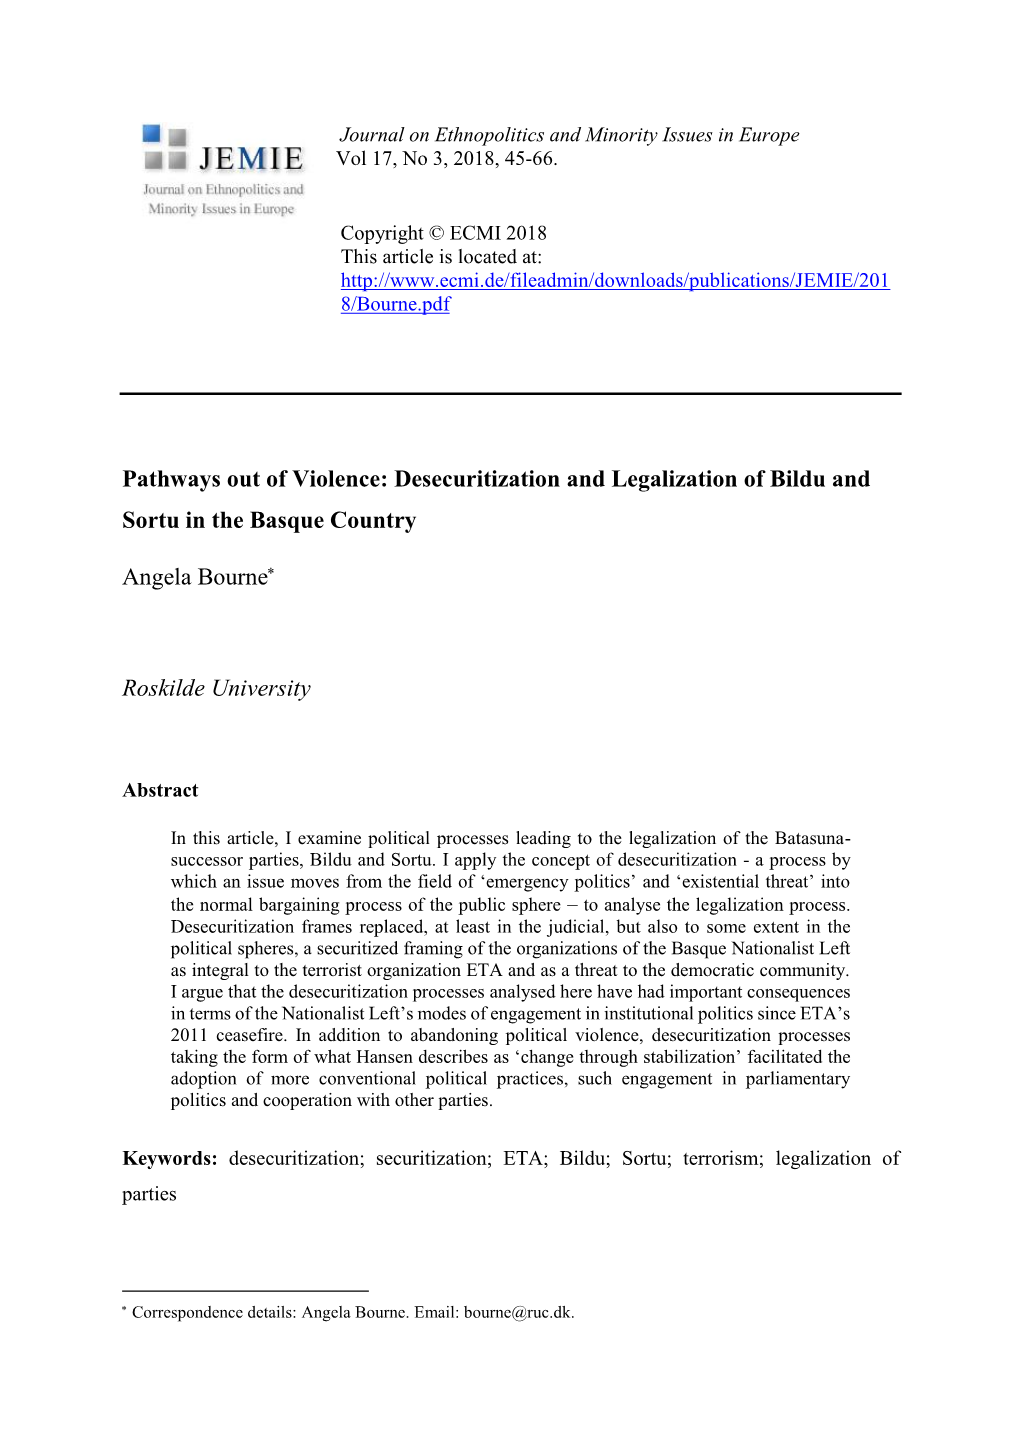 Pathways out of Violence: Desecuritization and Legalization of Bildu and Sortu in the Basque Country